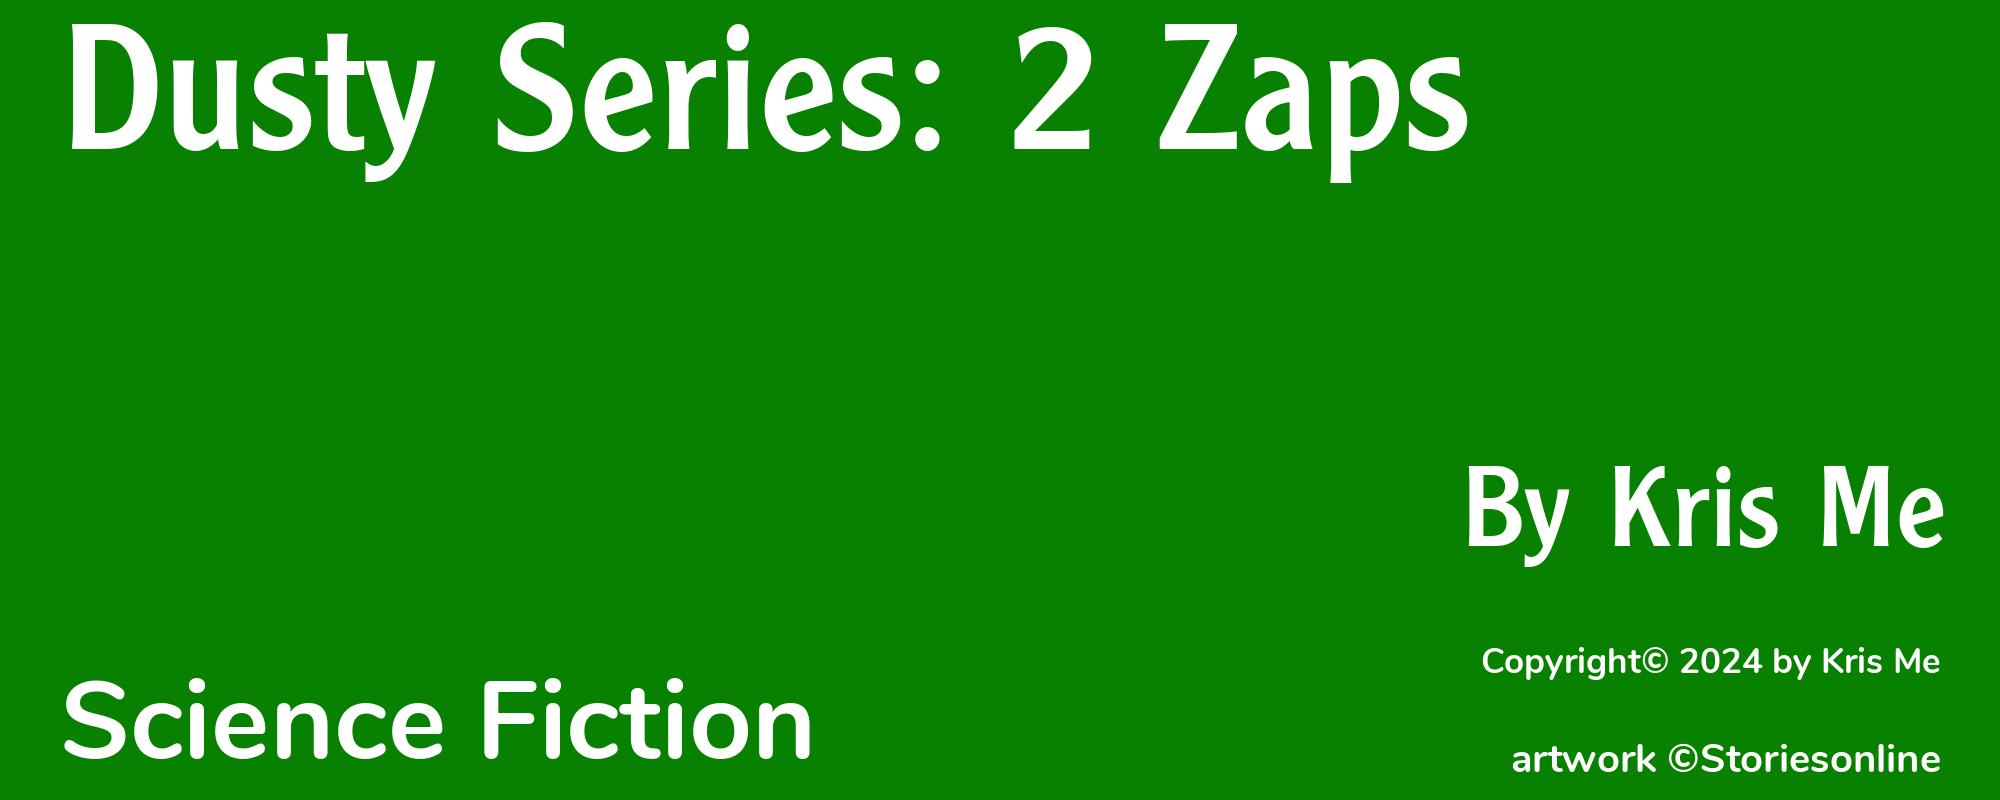 Dusty Series: 2 Zaps - Cover